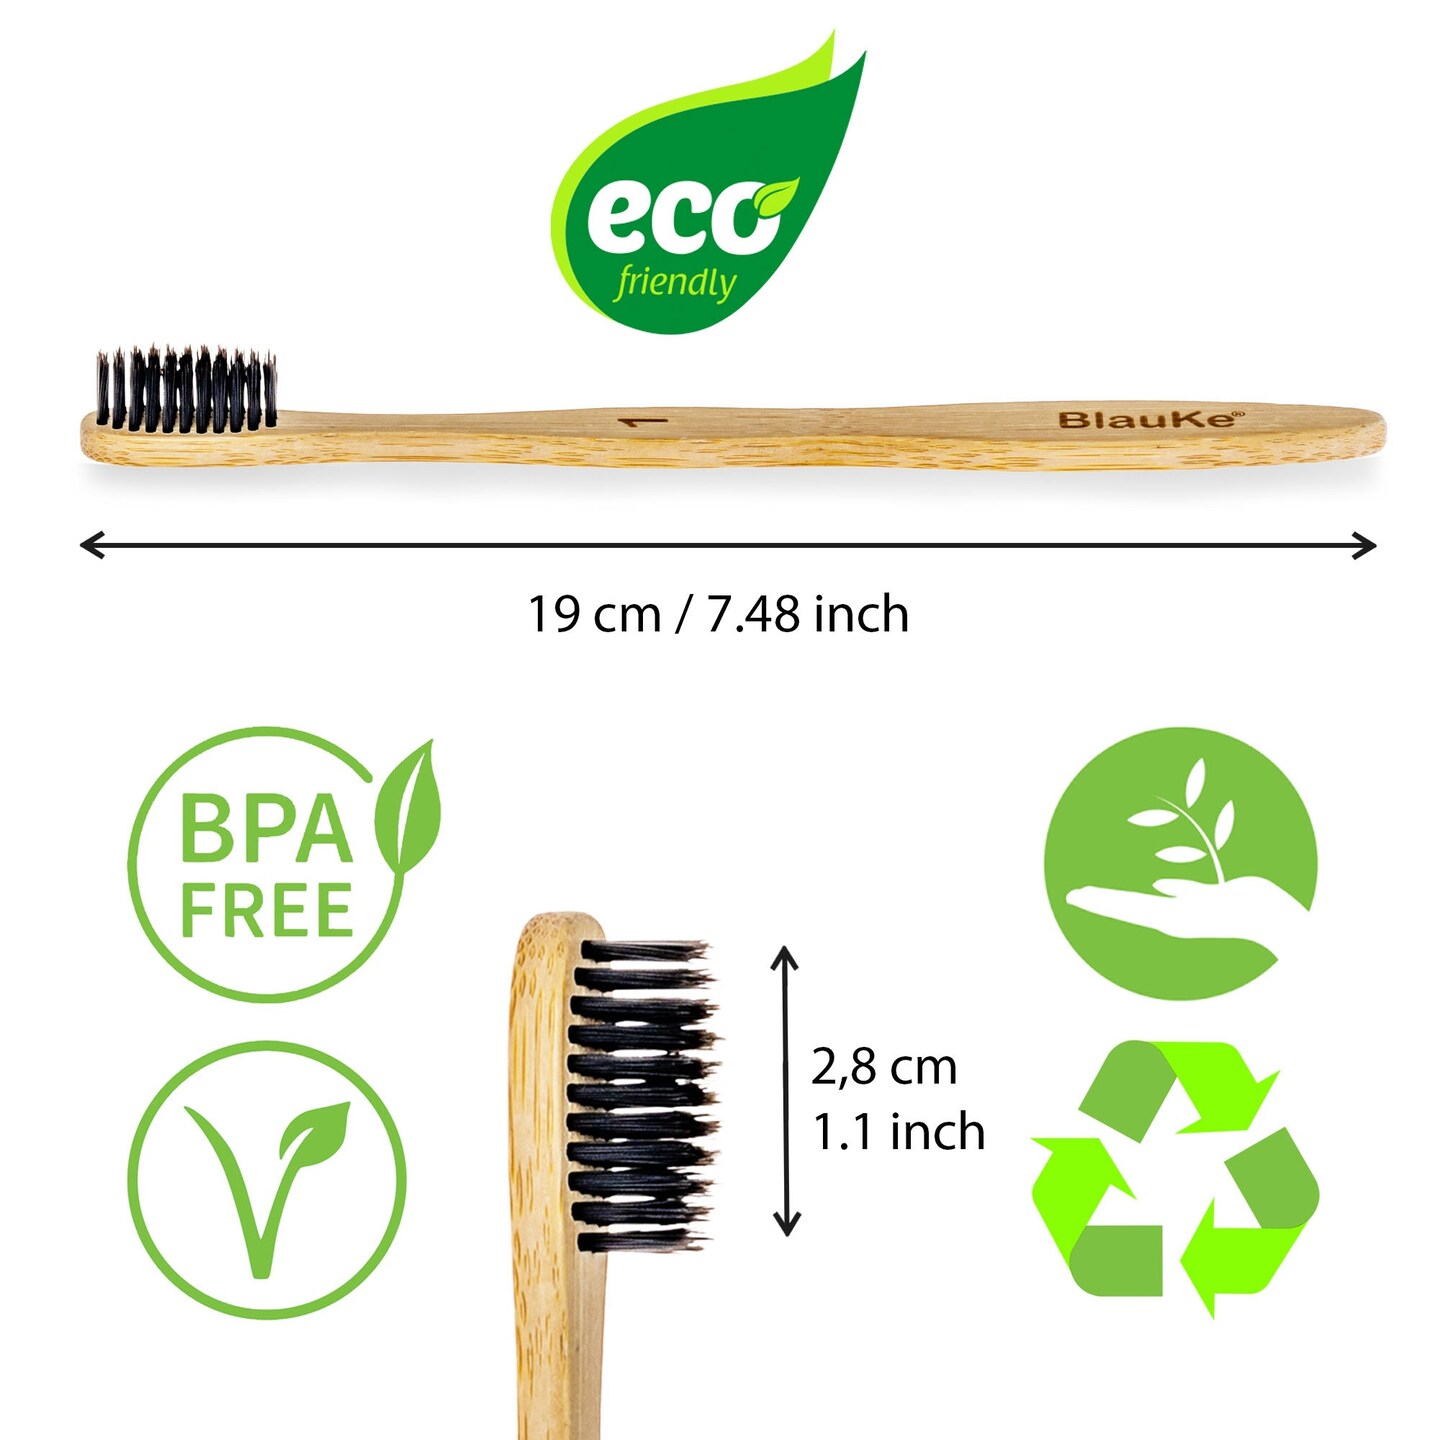 BlauKe&#xAE; Bamboo Toothbrush Set 4-Pack - Bamboo Toothbrushes with Soft Bristles for Adults - Eco-Friendly, Biodegradable, Natural Wooden Toothbrushes